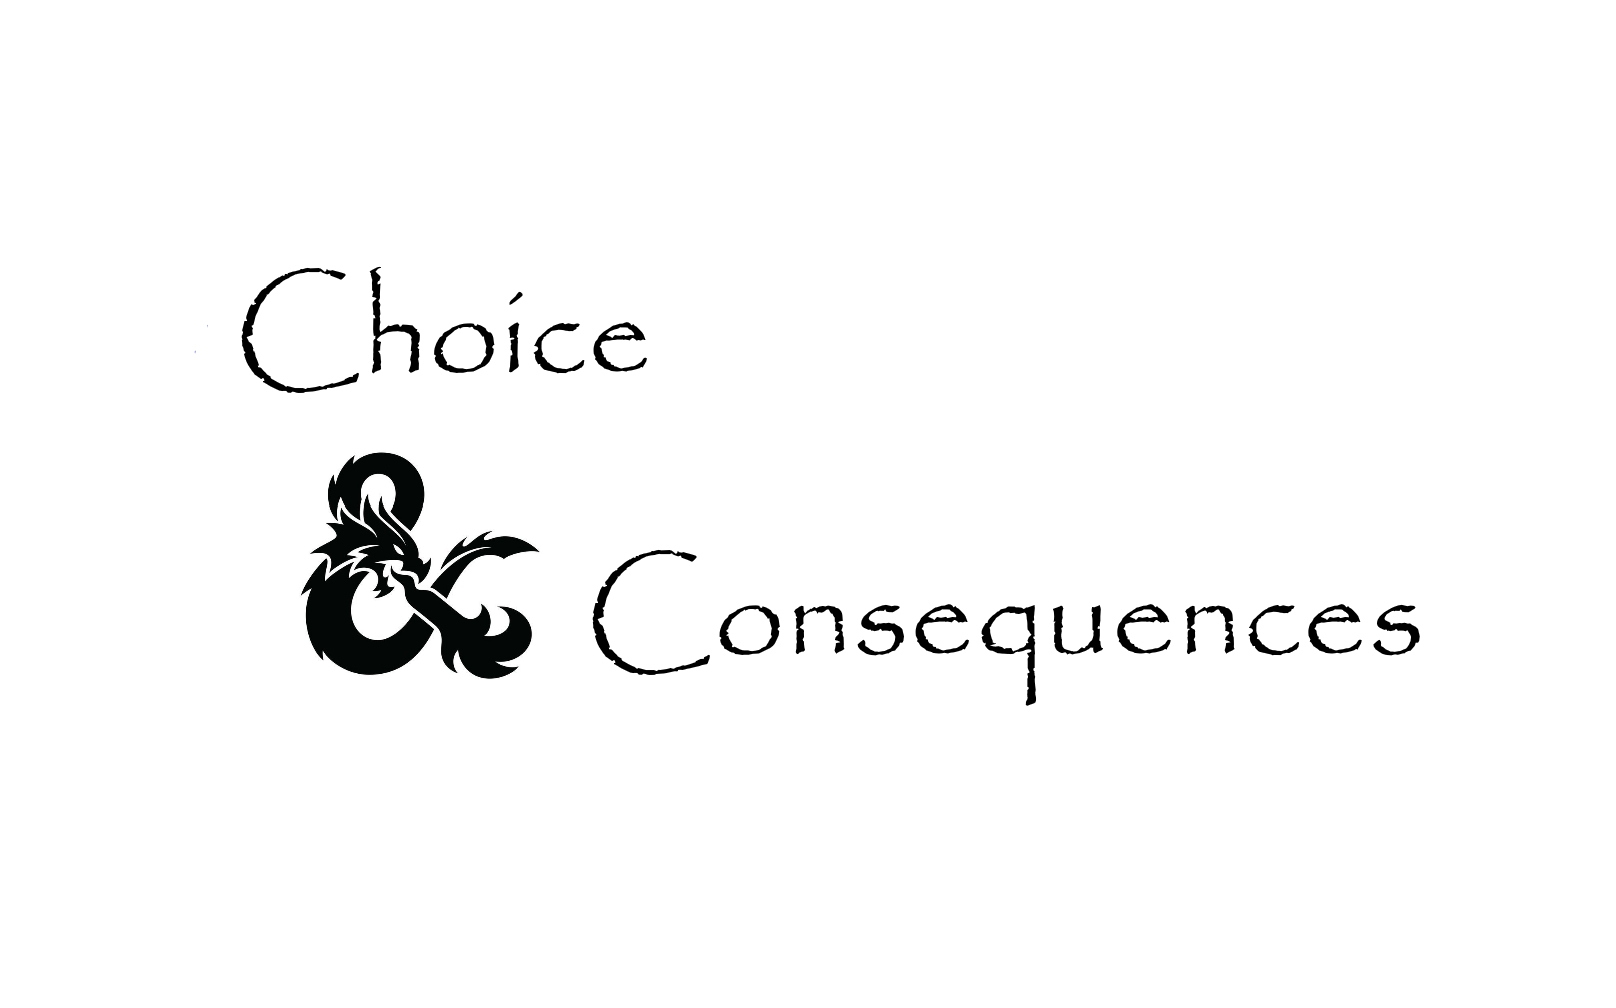 Player Choice and Consequences